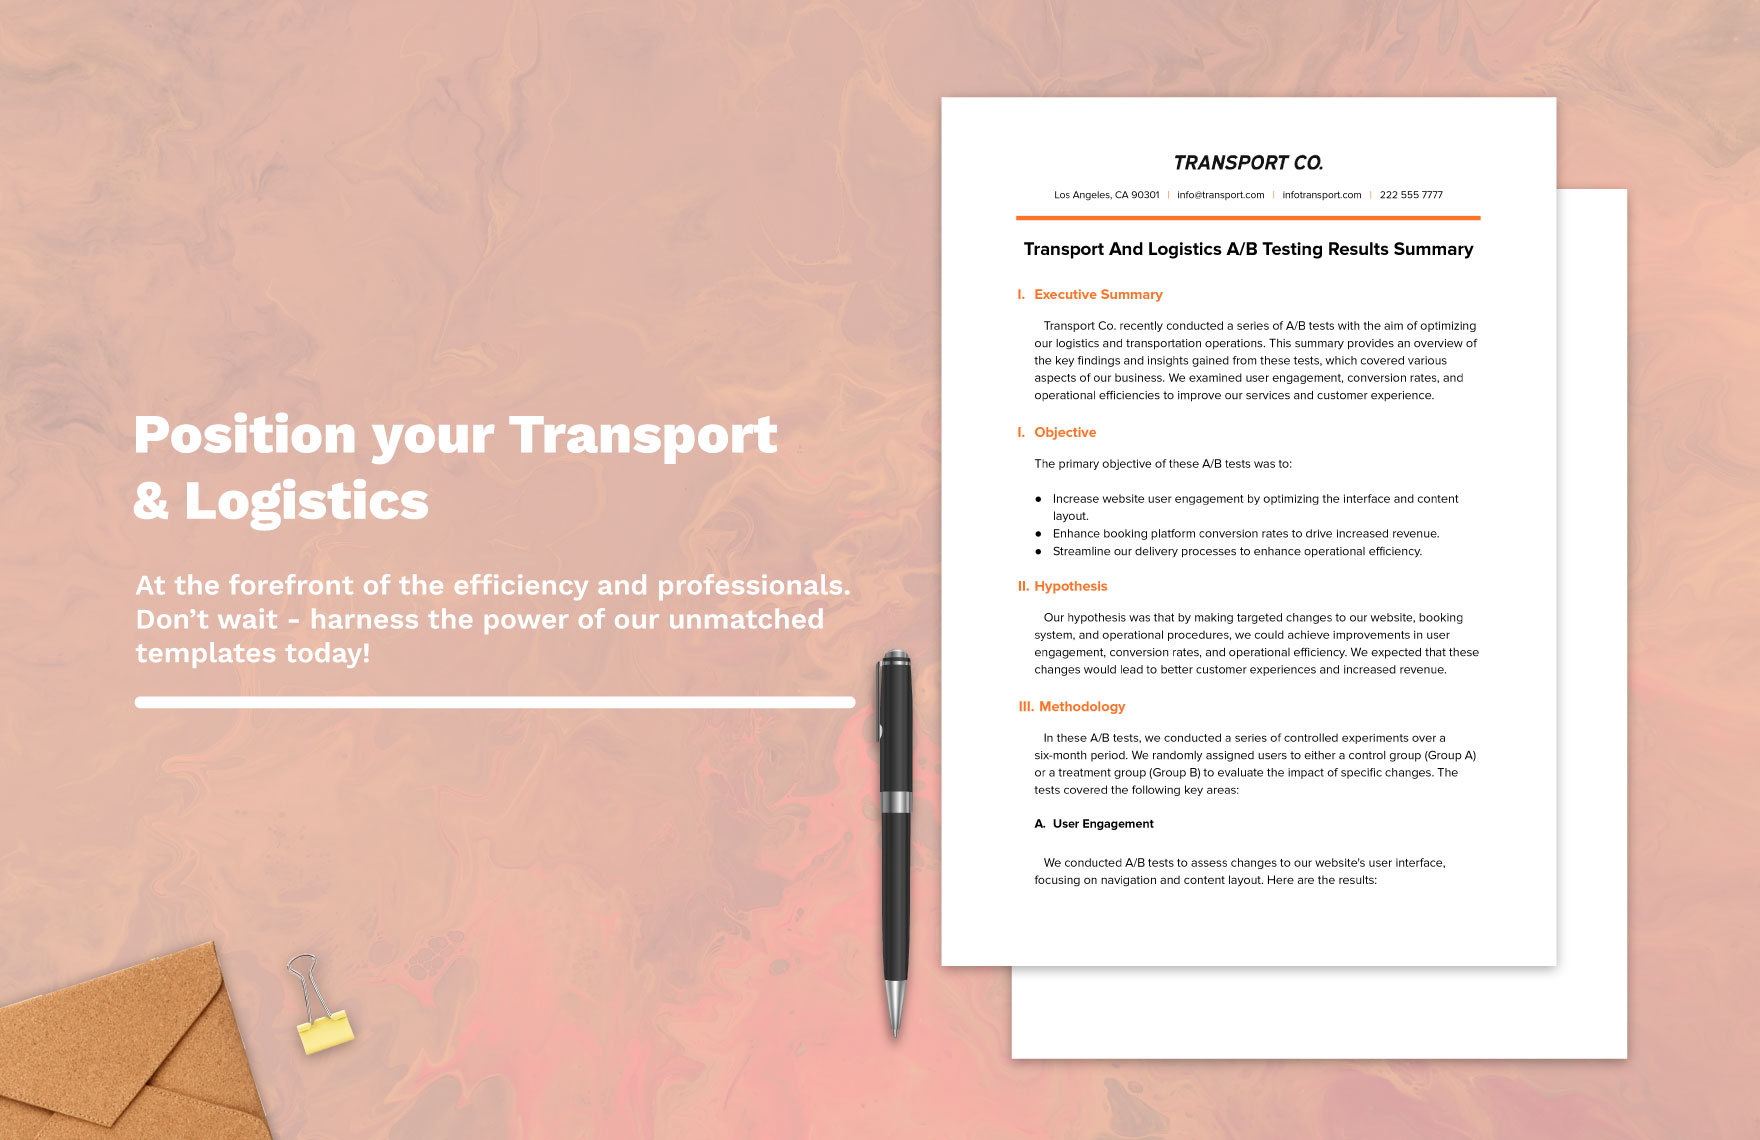 Transport and Logistics A/B Testing Results Summary Template